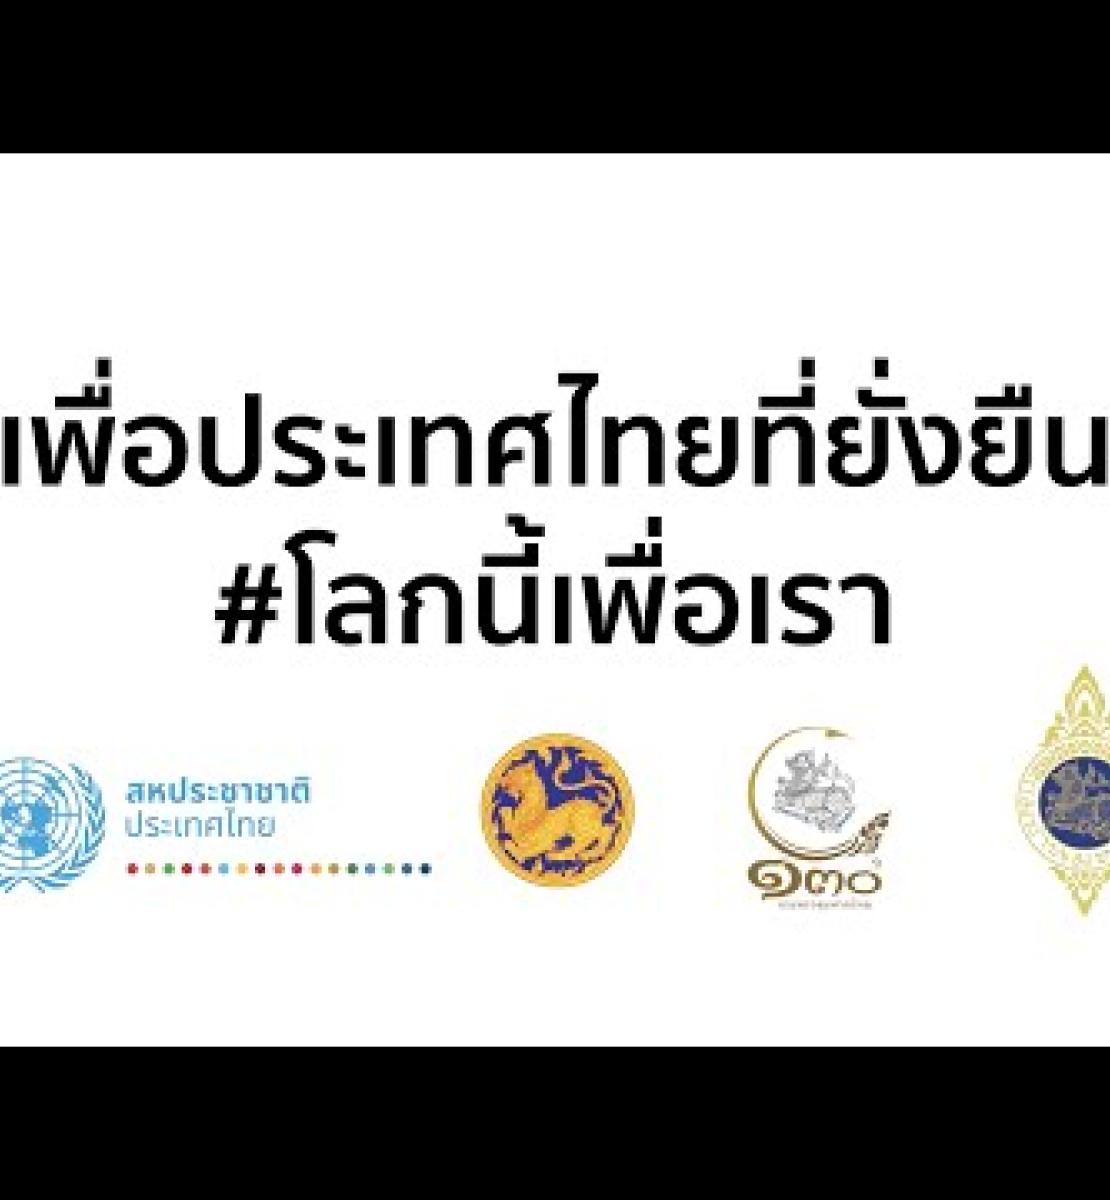 In landmark move, all 76 governors in Thailand sign SDGs pact - with focus on climate action